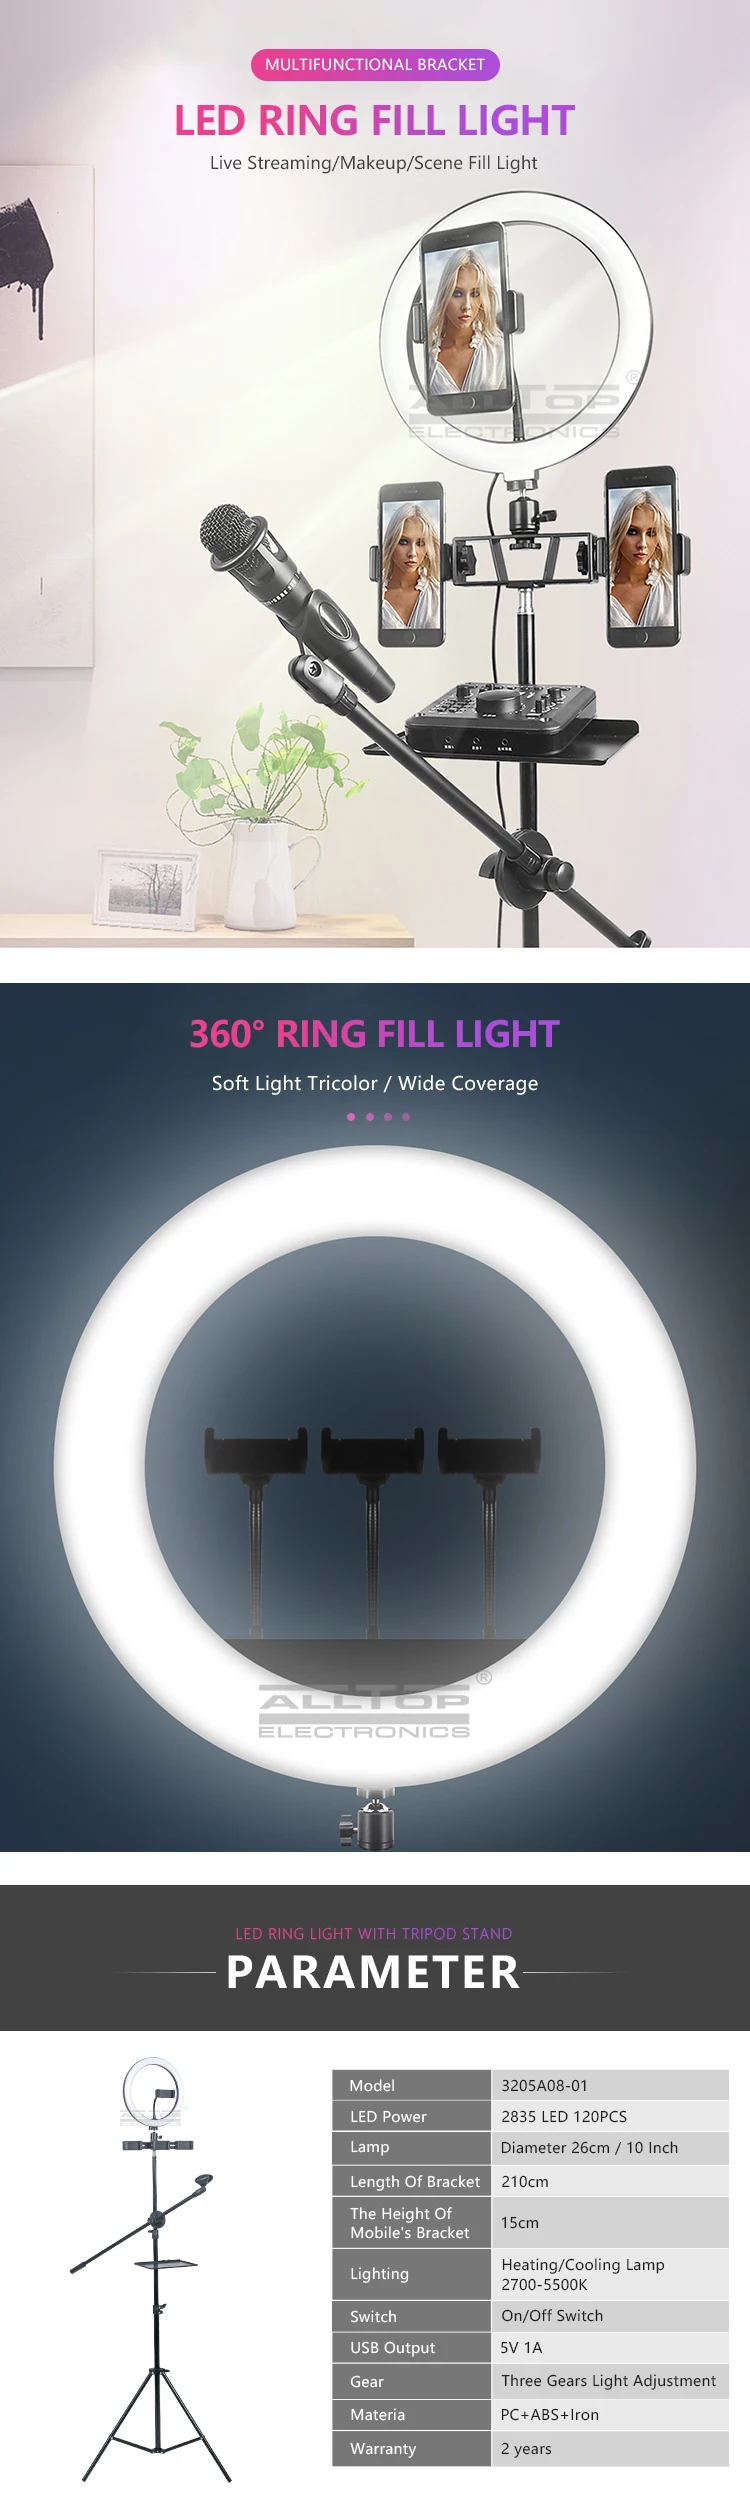 ALLTOP Phone Holder Camera Video Photography Selfie with Stand Tripod Led Ring Light